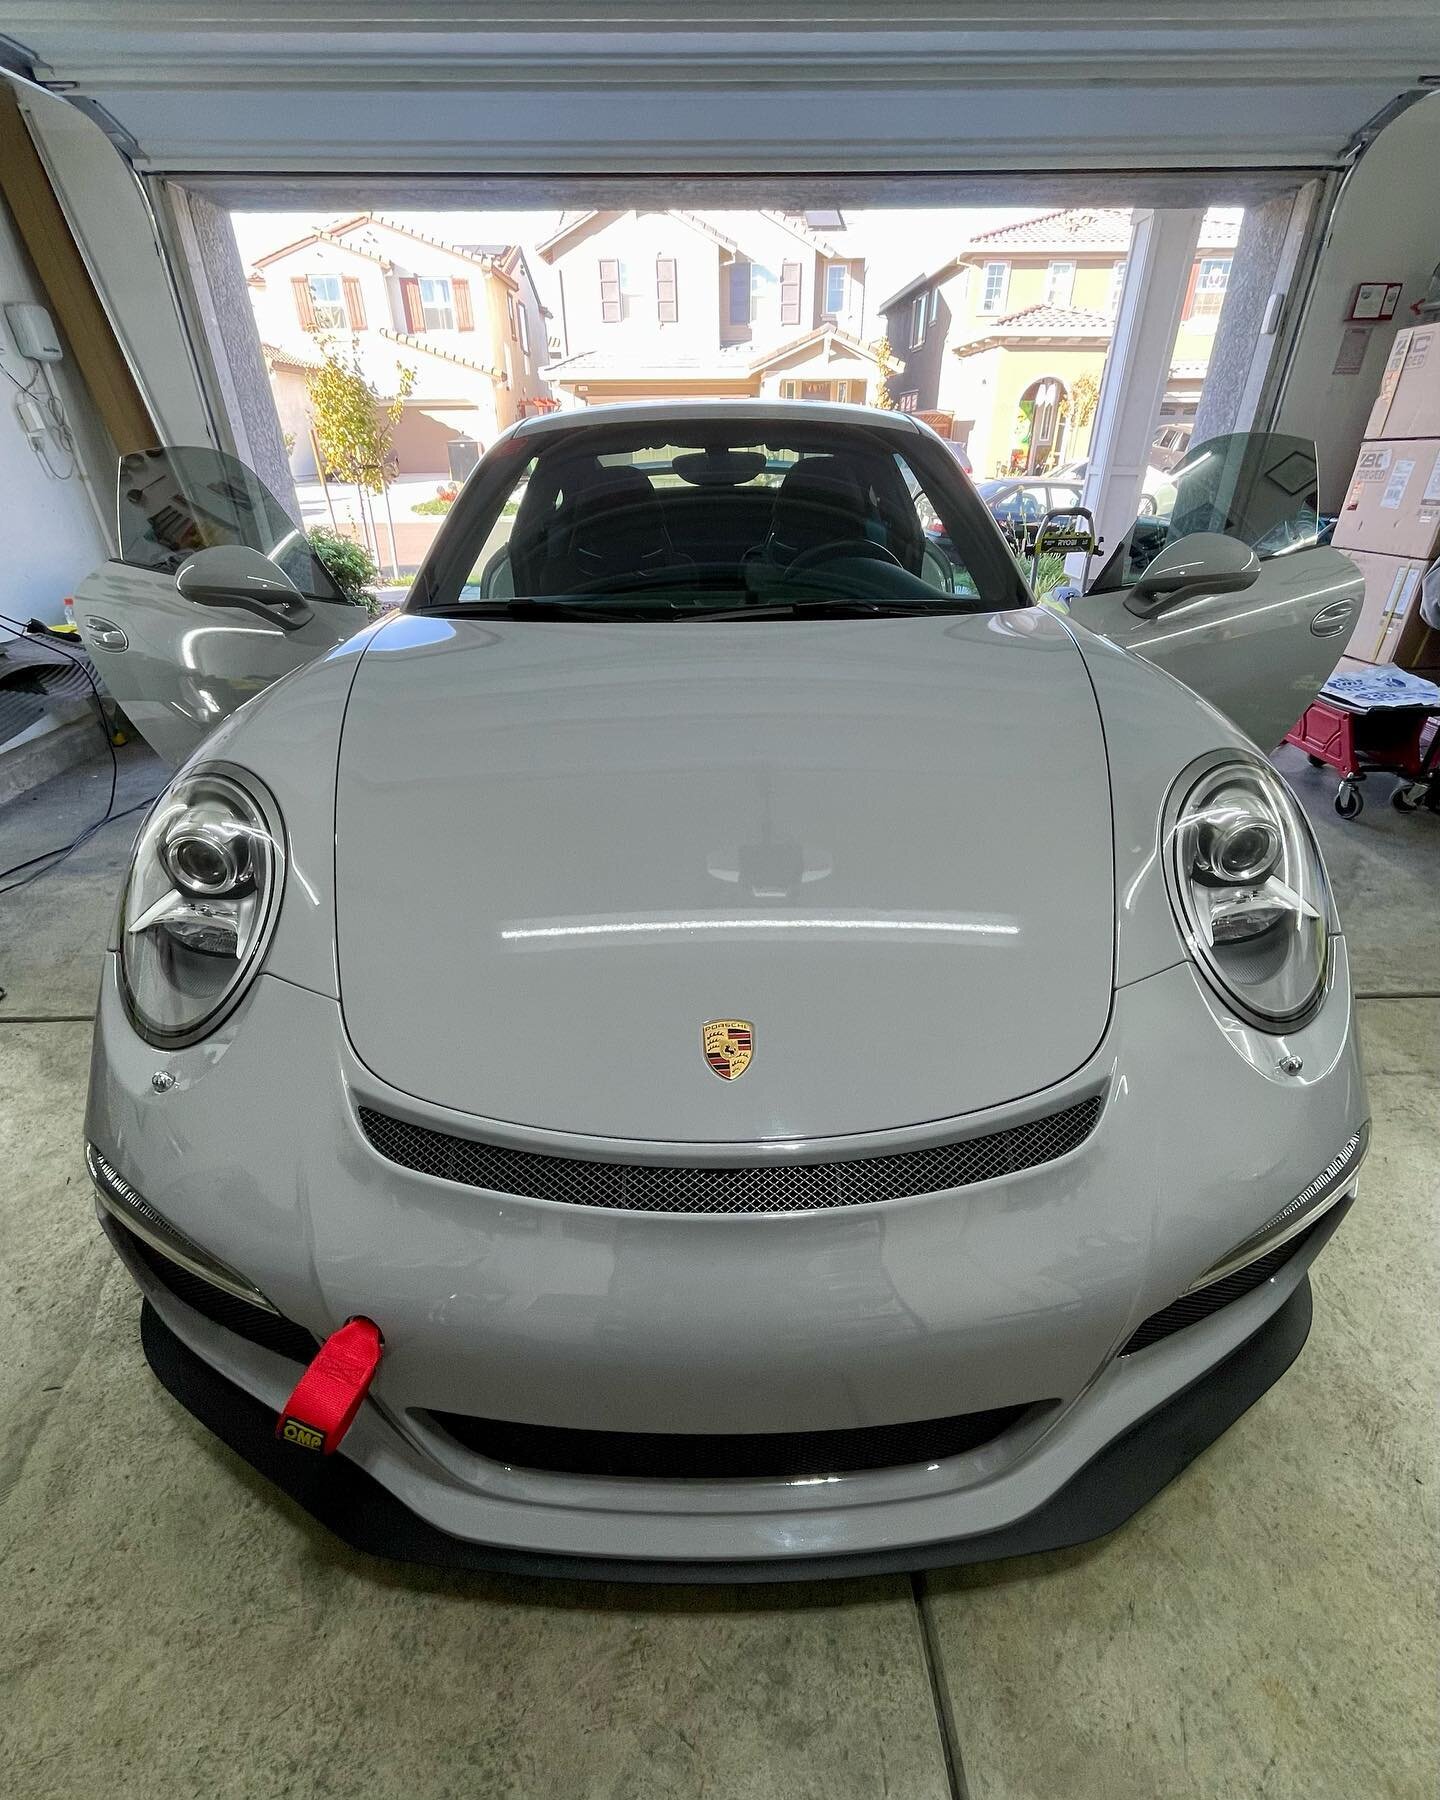 Porsche 991 GT3 in for a detail after a track day! We gave this car a thorough cleaning inside &amp; out, removed tire rubber from the rocker panels, &amp; even coated the wheels with @adamspolishes 7-9 Year Graphene Ceramic! &thinsp;&thinsp;
&thinsp